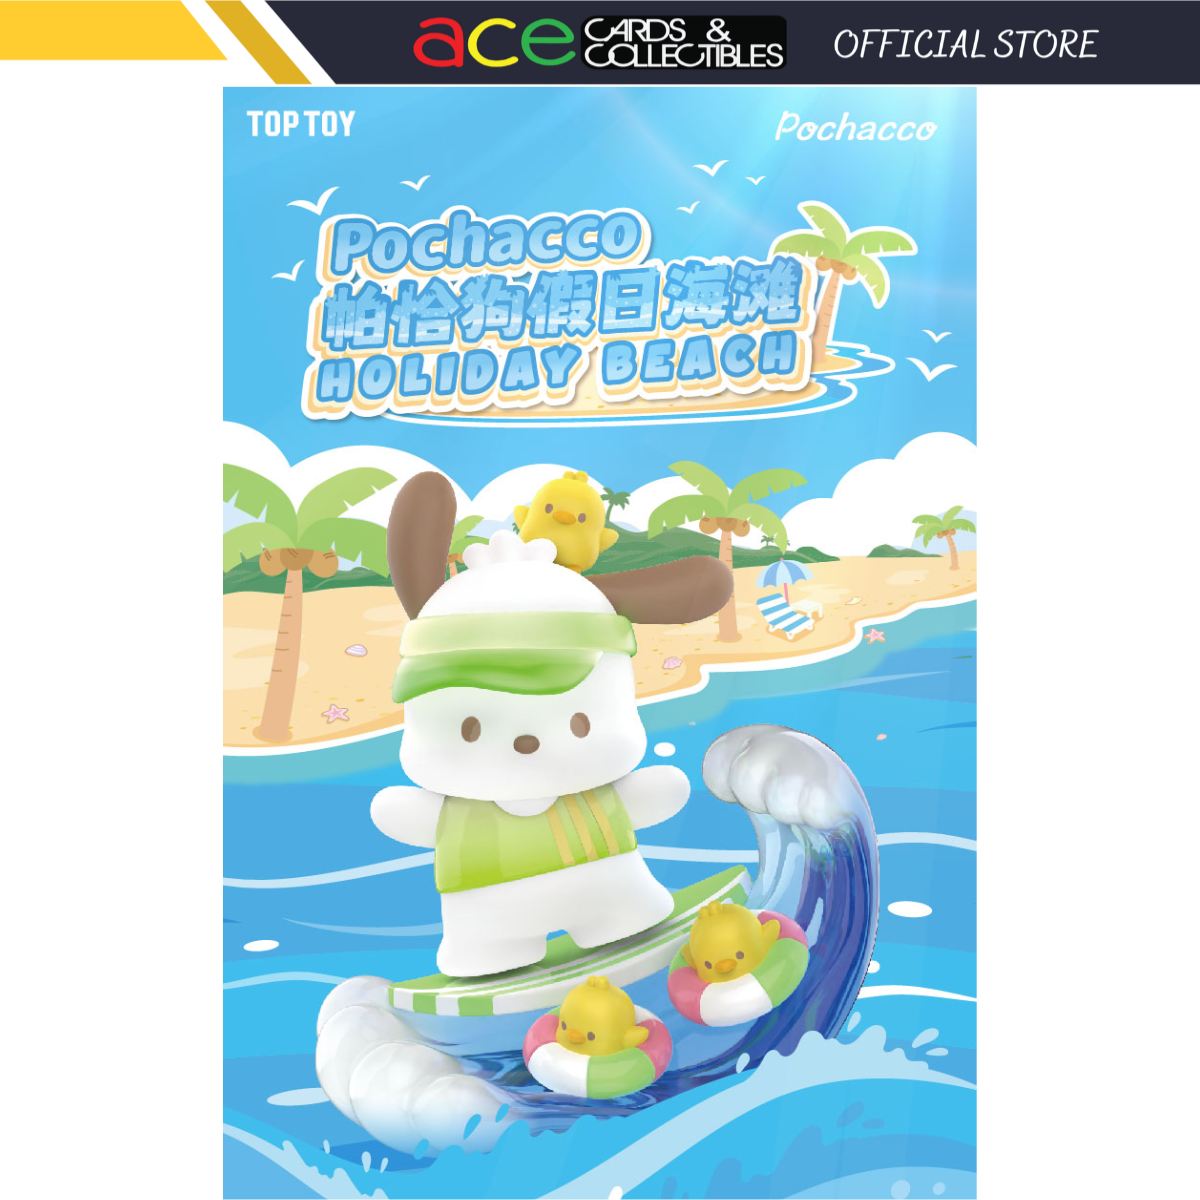 TOPTOY x Pochacco Holiday Beach Series-Single Box (Random)-TopToy-Ace Cards & Collectibles